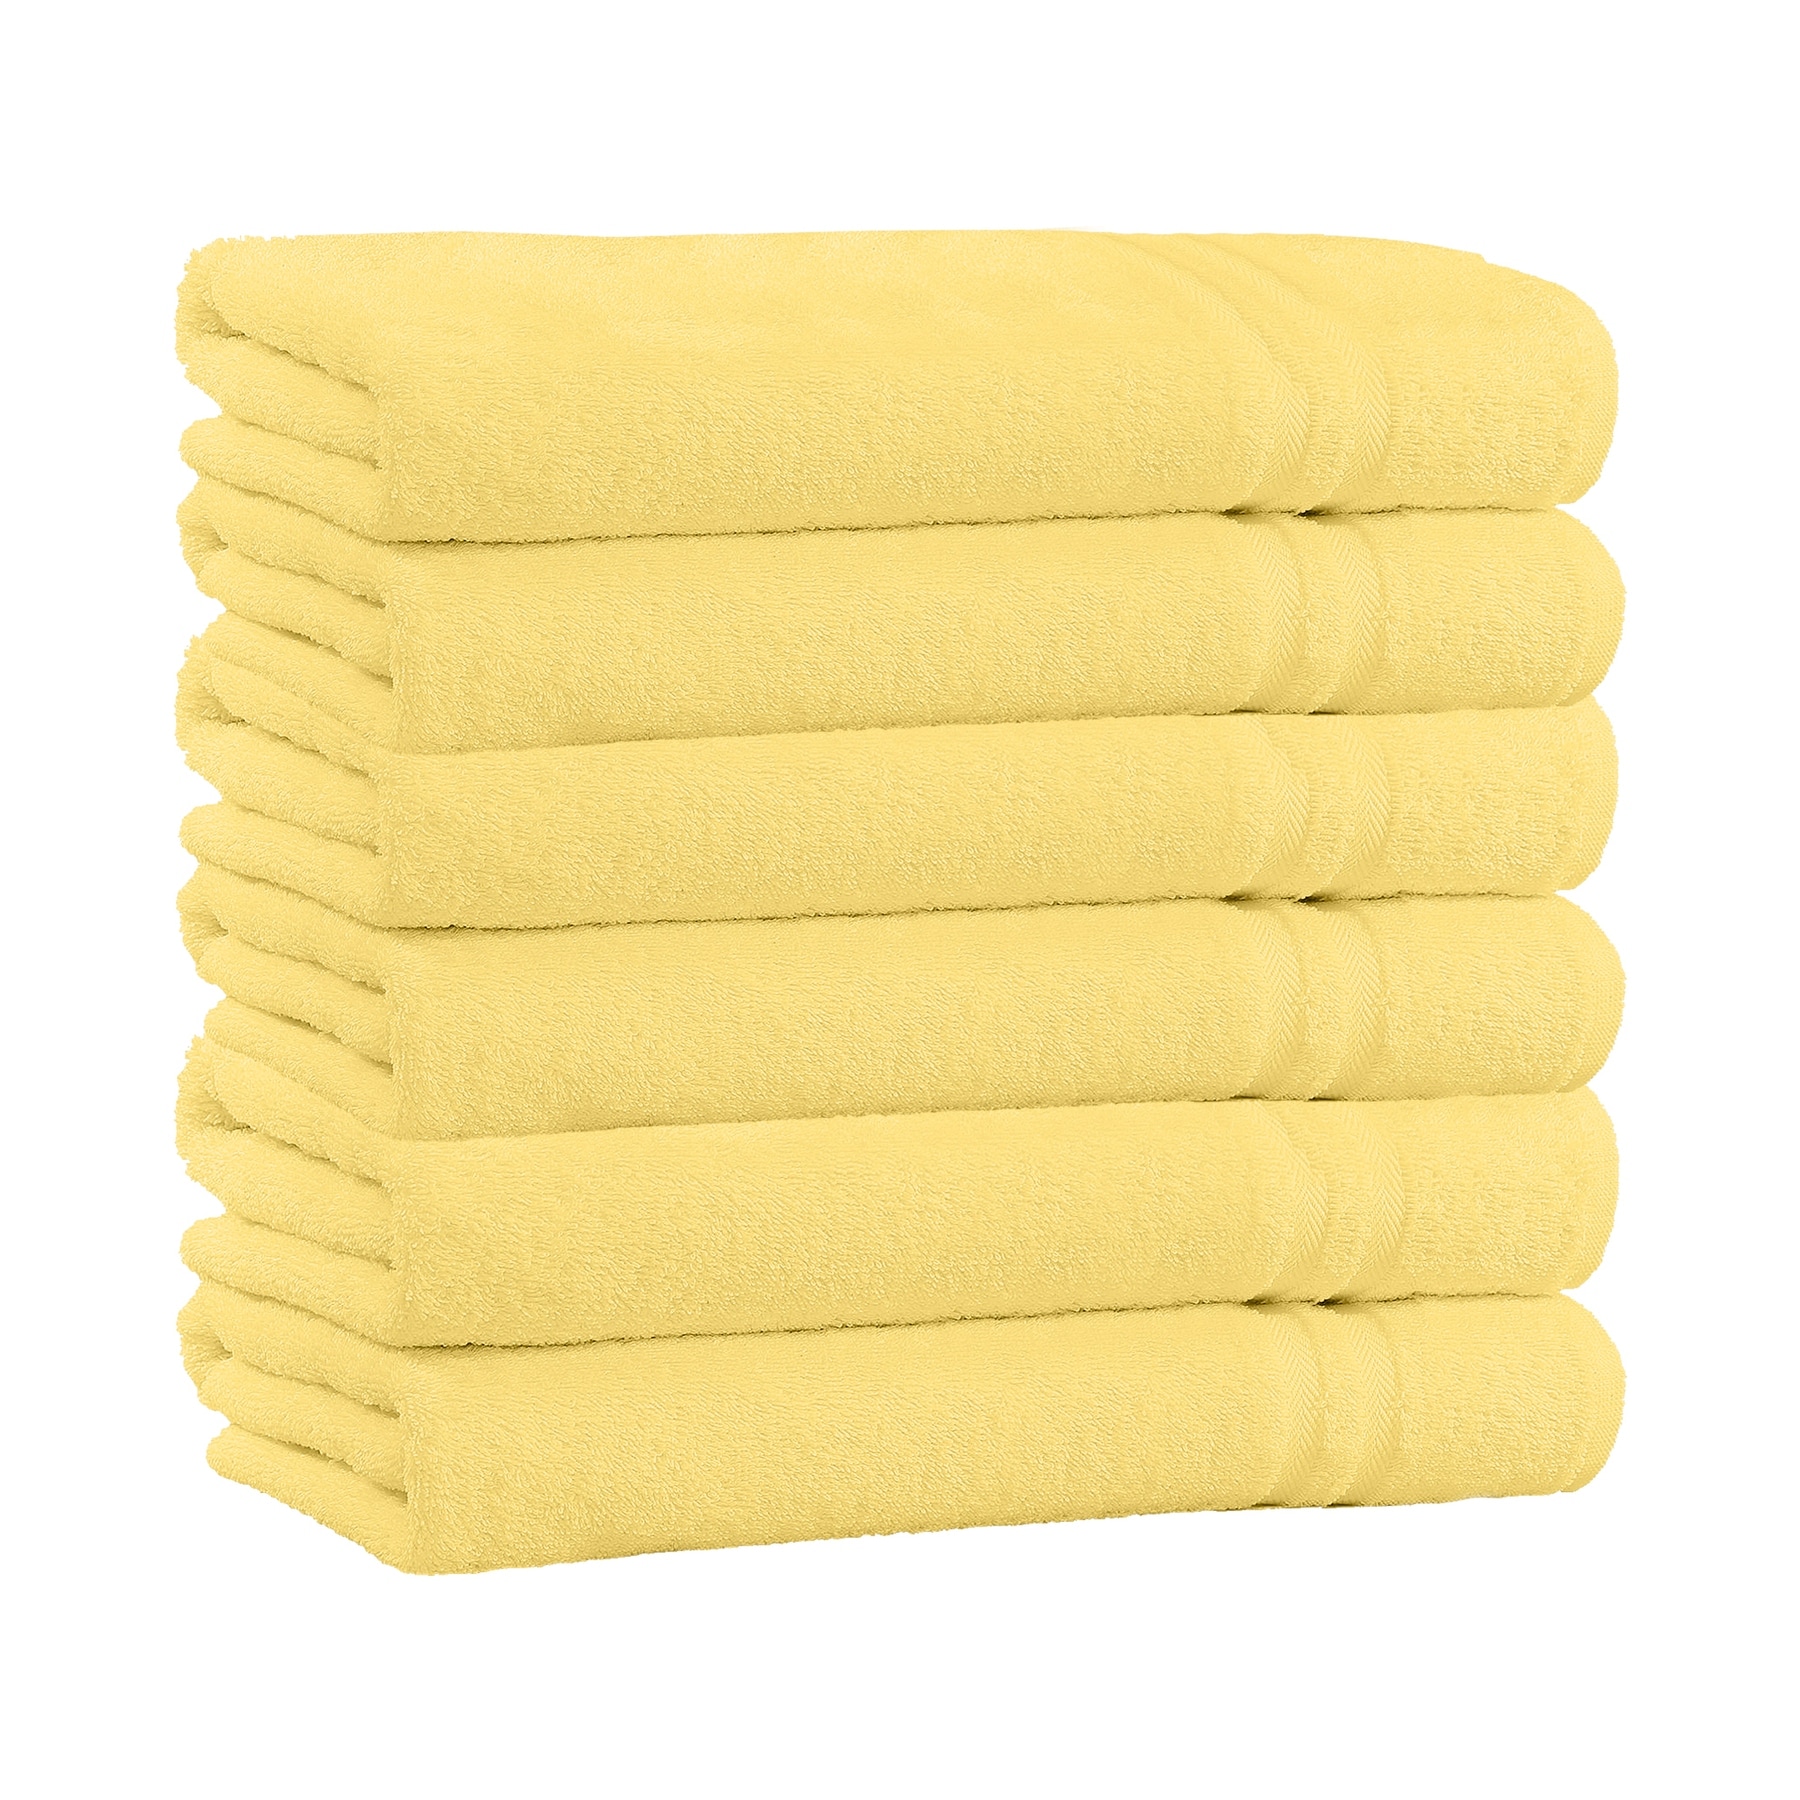 https://ak1.ostkcdn.com/images/products/is/images/direct/92d6868828cbcc5458934a8cf9373122ebd2485e/5-Pack-100%25-Cotton-Extra-Plush-%26-Absorbent-Bath-Towels.jpg